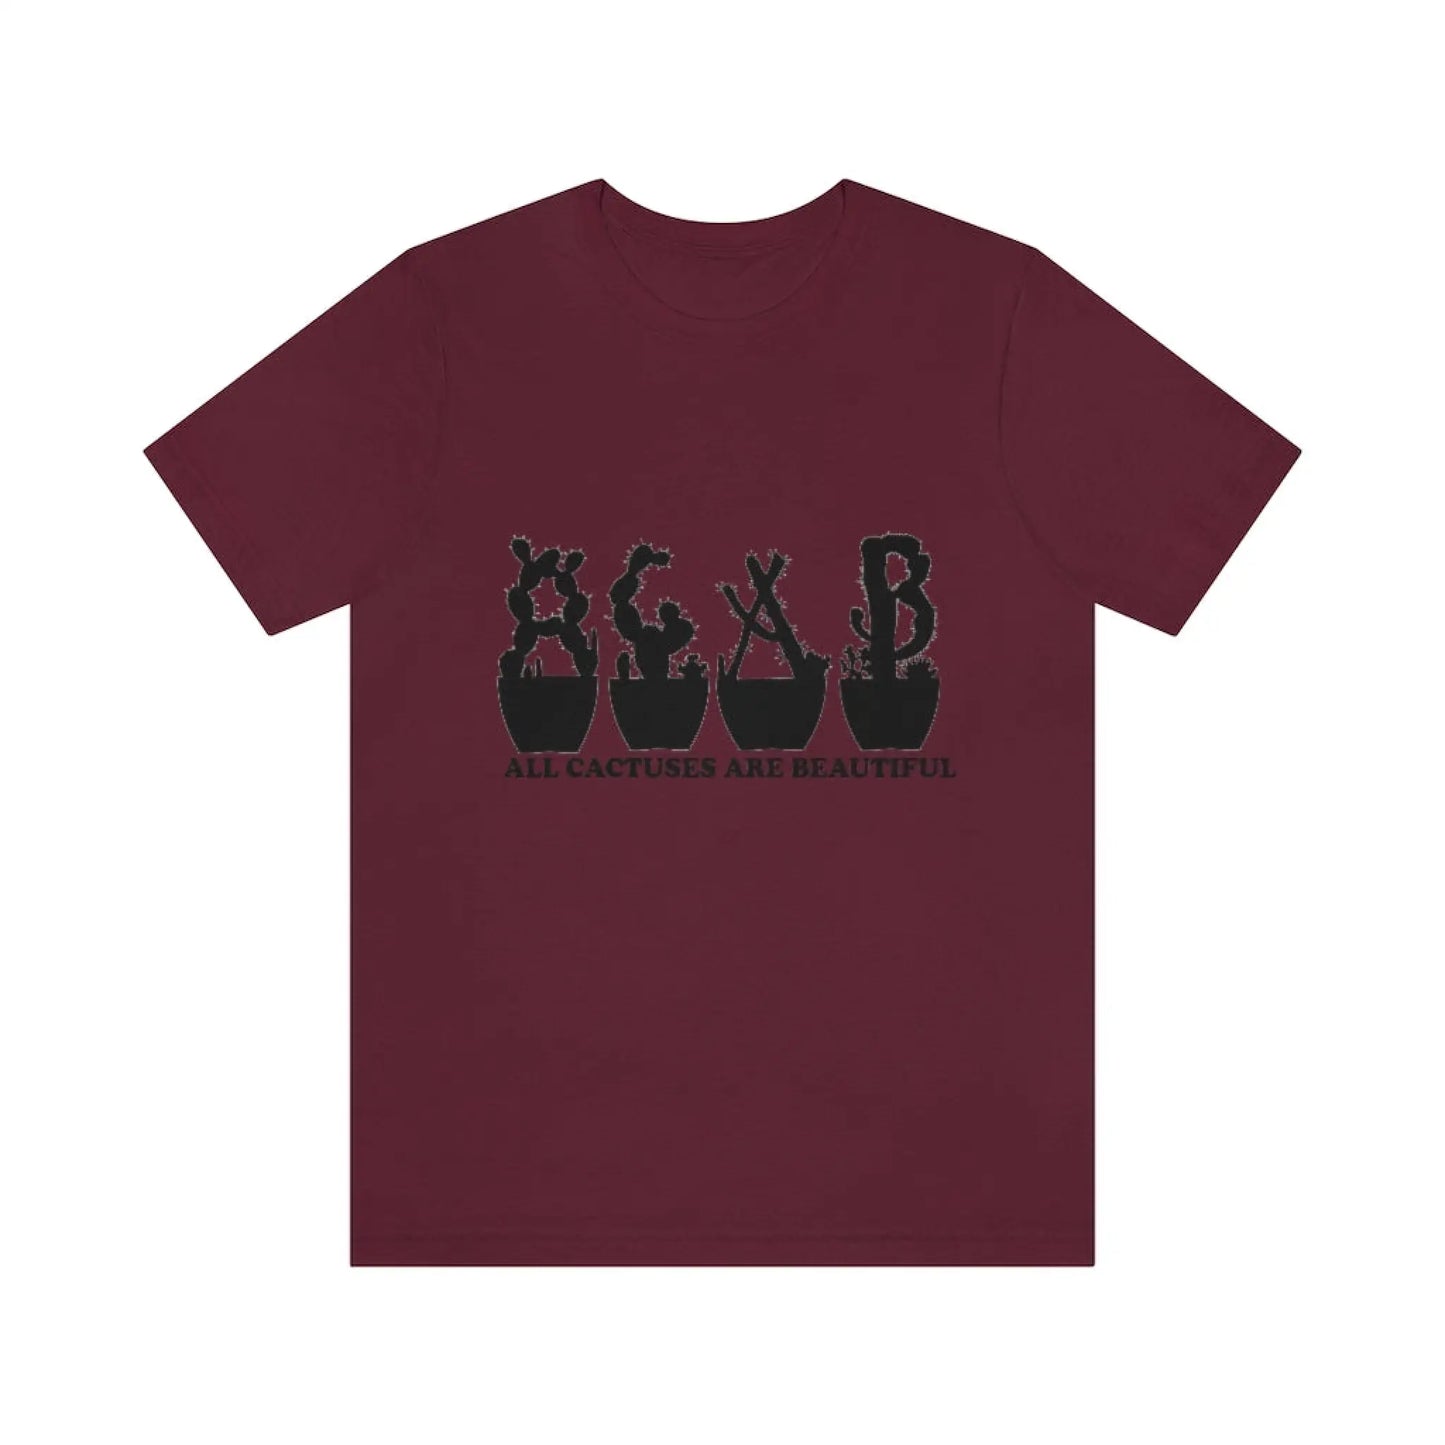 Shirts XL - All Cactuses Are Beautiful - Maroon / T-Shirt